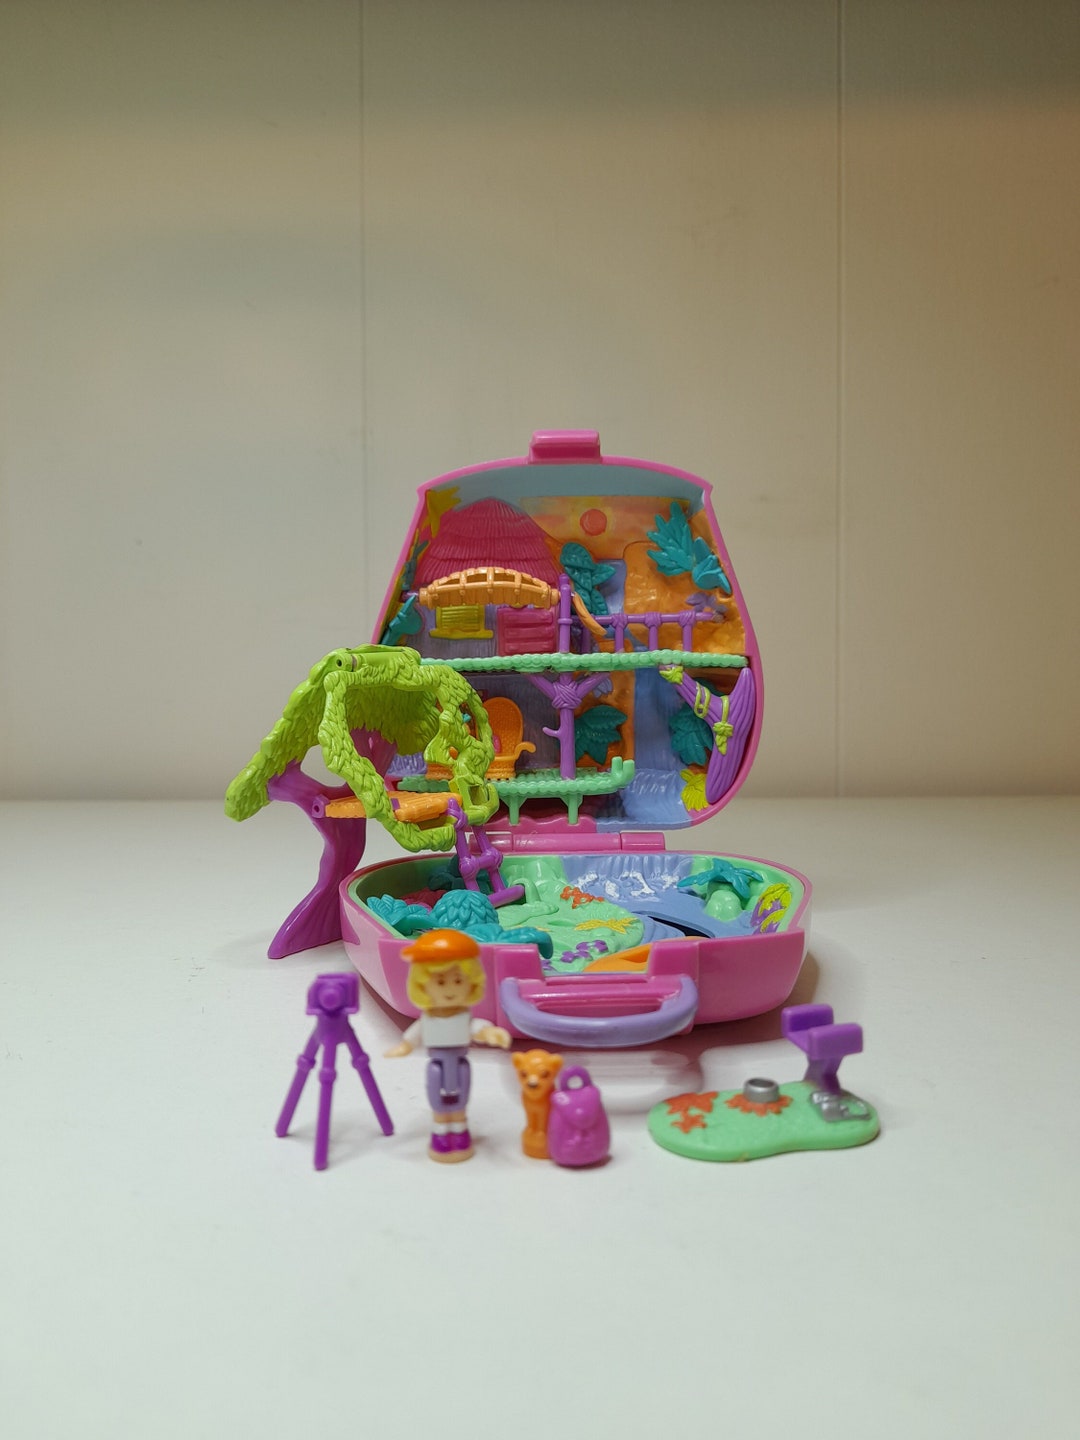 Polly Pocket Adventure Friends Set *Discontinued and Collectible Set